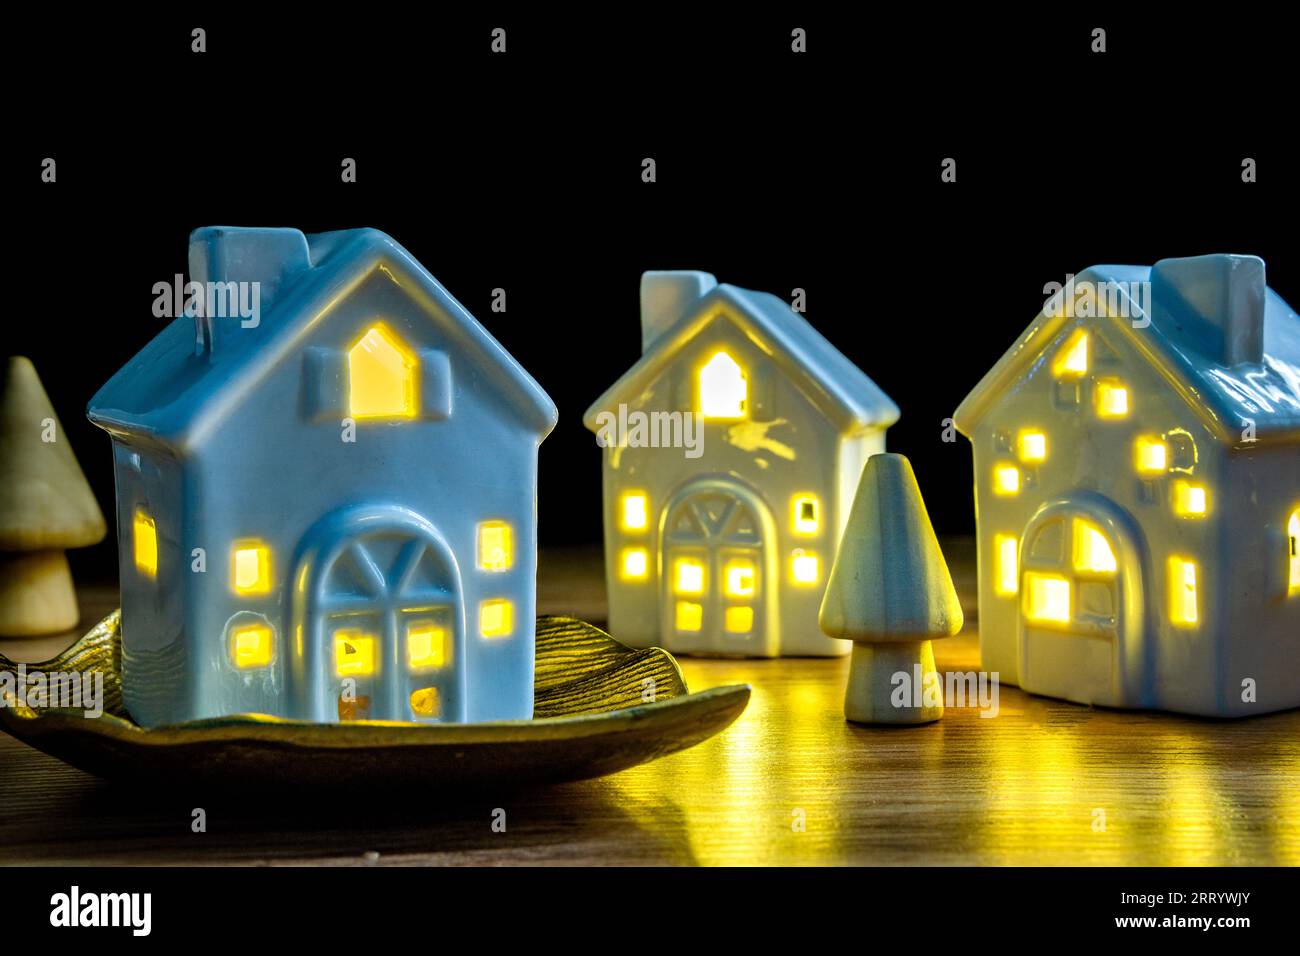 ceramic houses with light on housing crisis property ownership concept Stock Photo